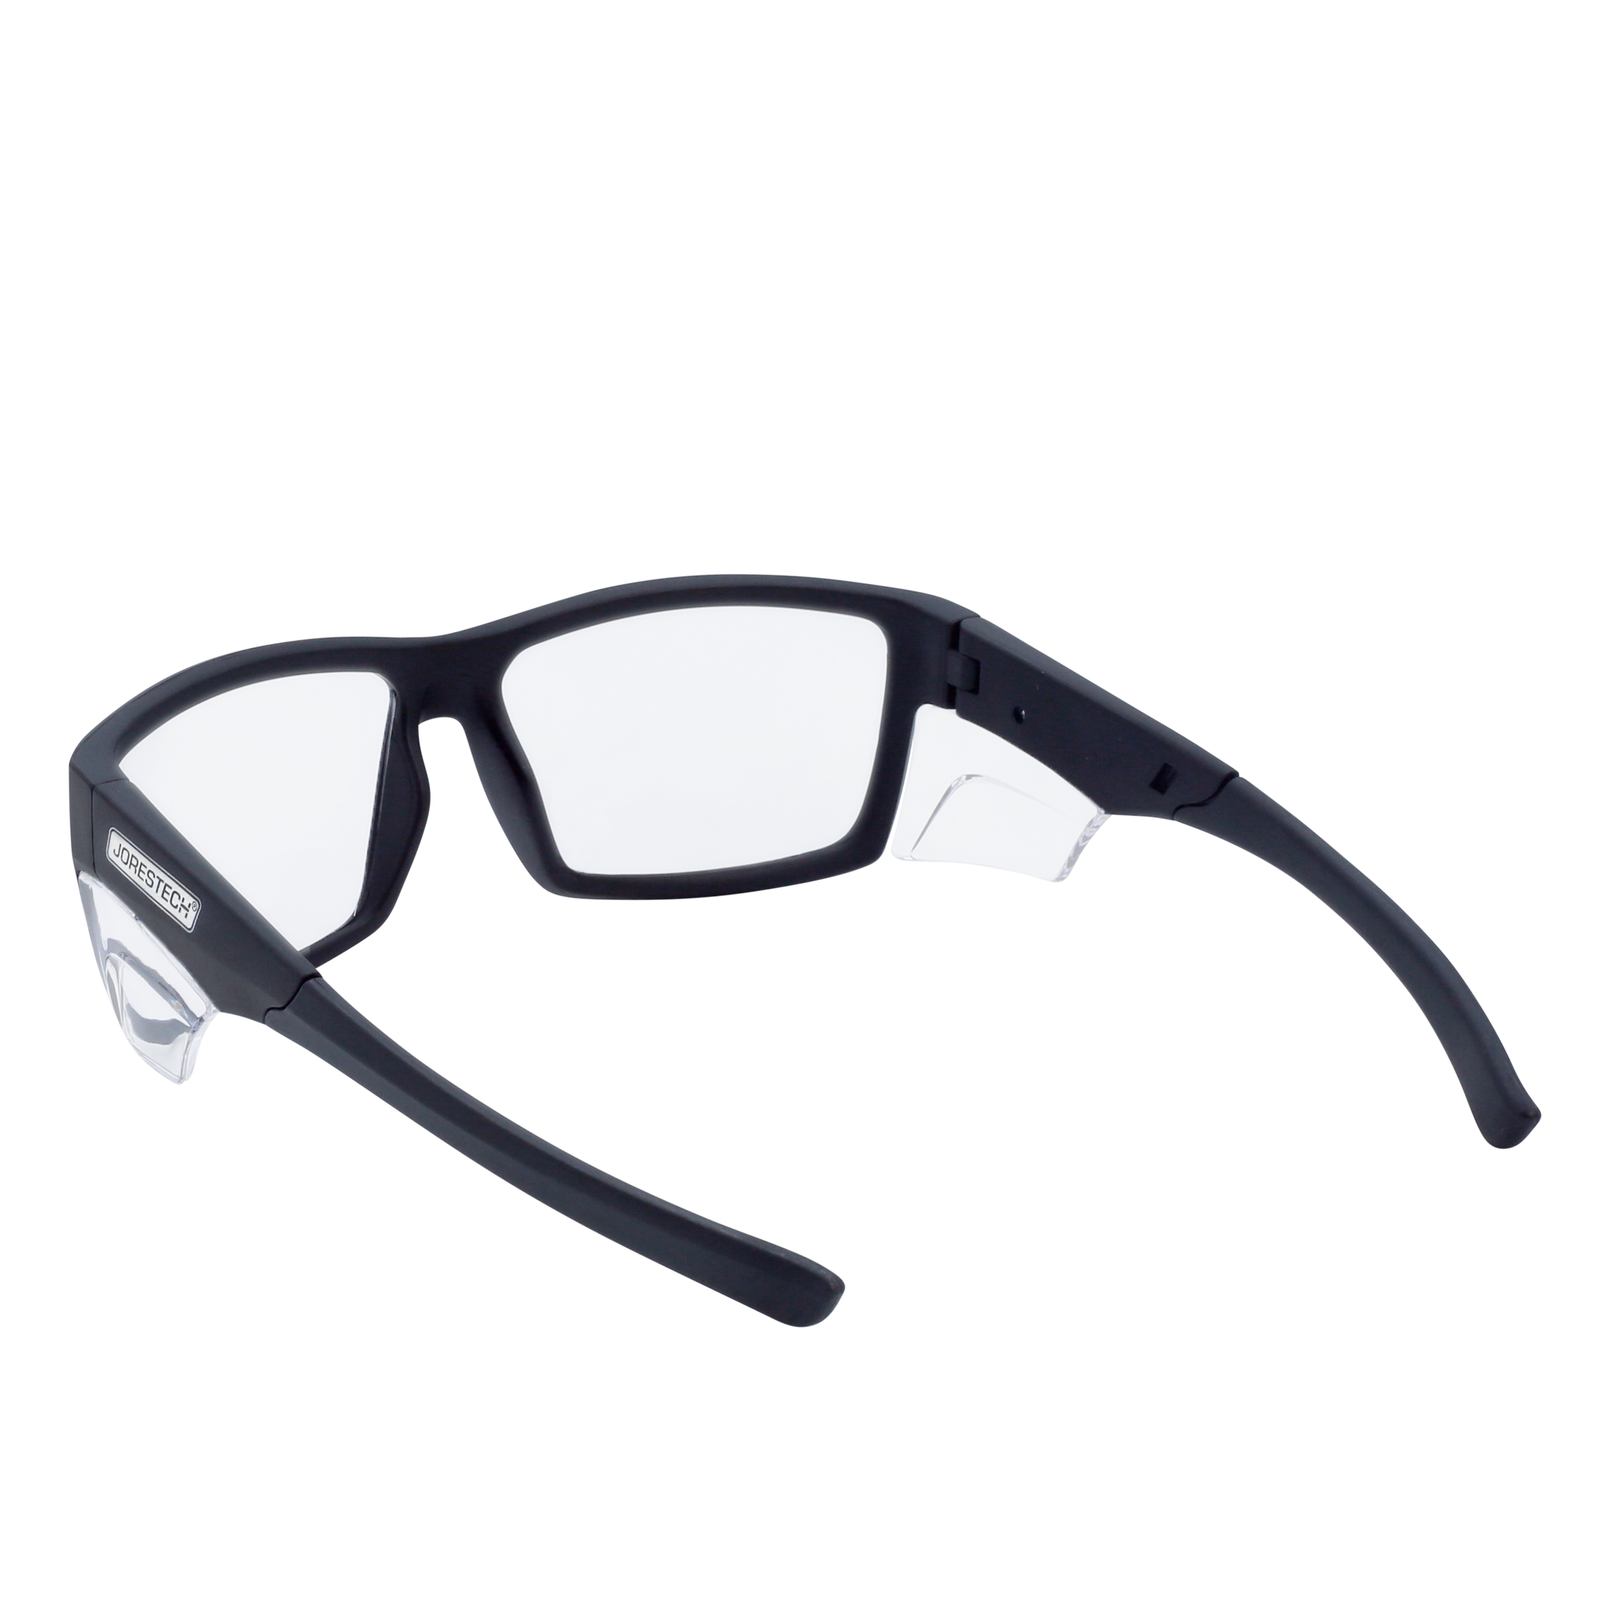 Image shows a back view of a JORESTECH safety Glass with clear side shield for high impact protection. These safety glasses with clear side shields  are ANSI and have black frame and clear polycarbonate lenses. The background of the image is white